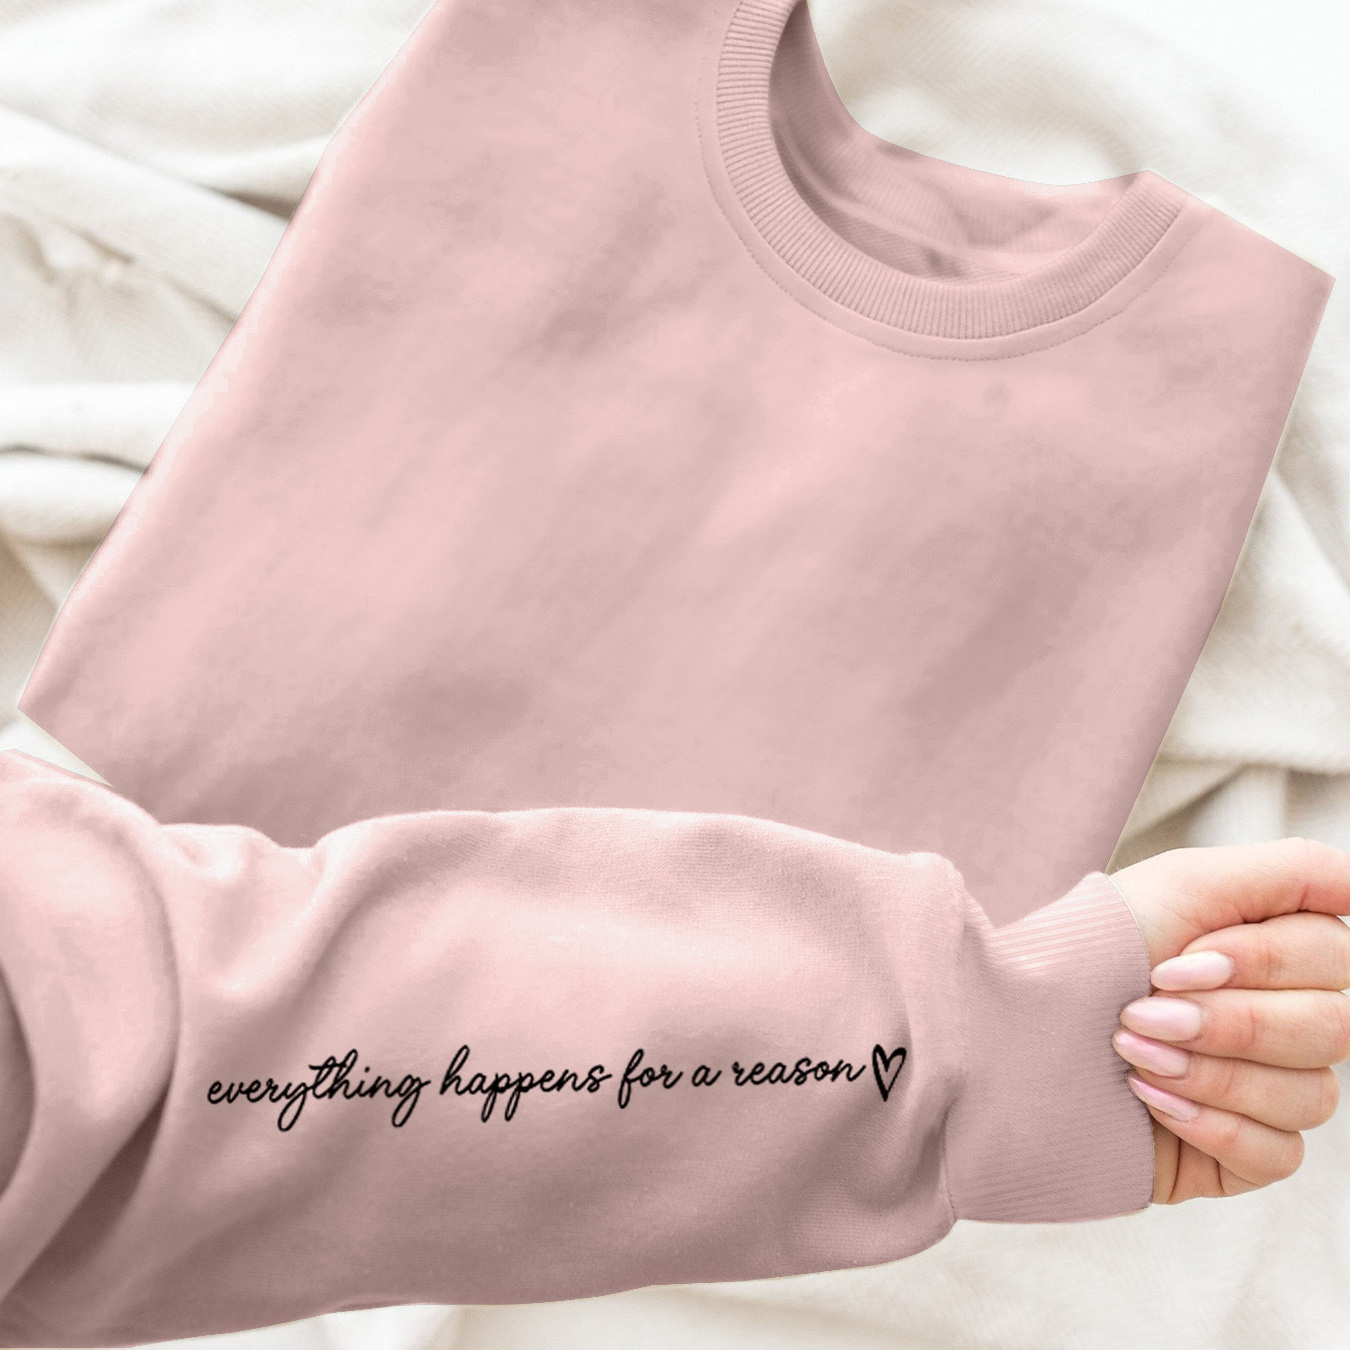 

Everything Happens For A Reason Letter Print Sweatshirt, Crew Neck Casual Sweatshirt For Fall & Spring, Women's Clothing